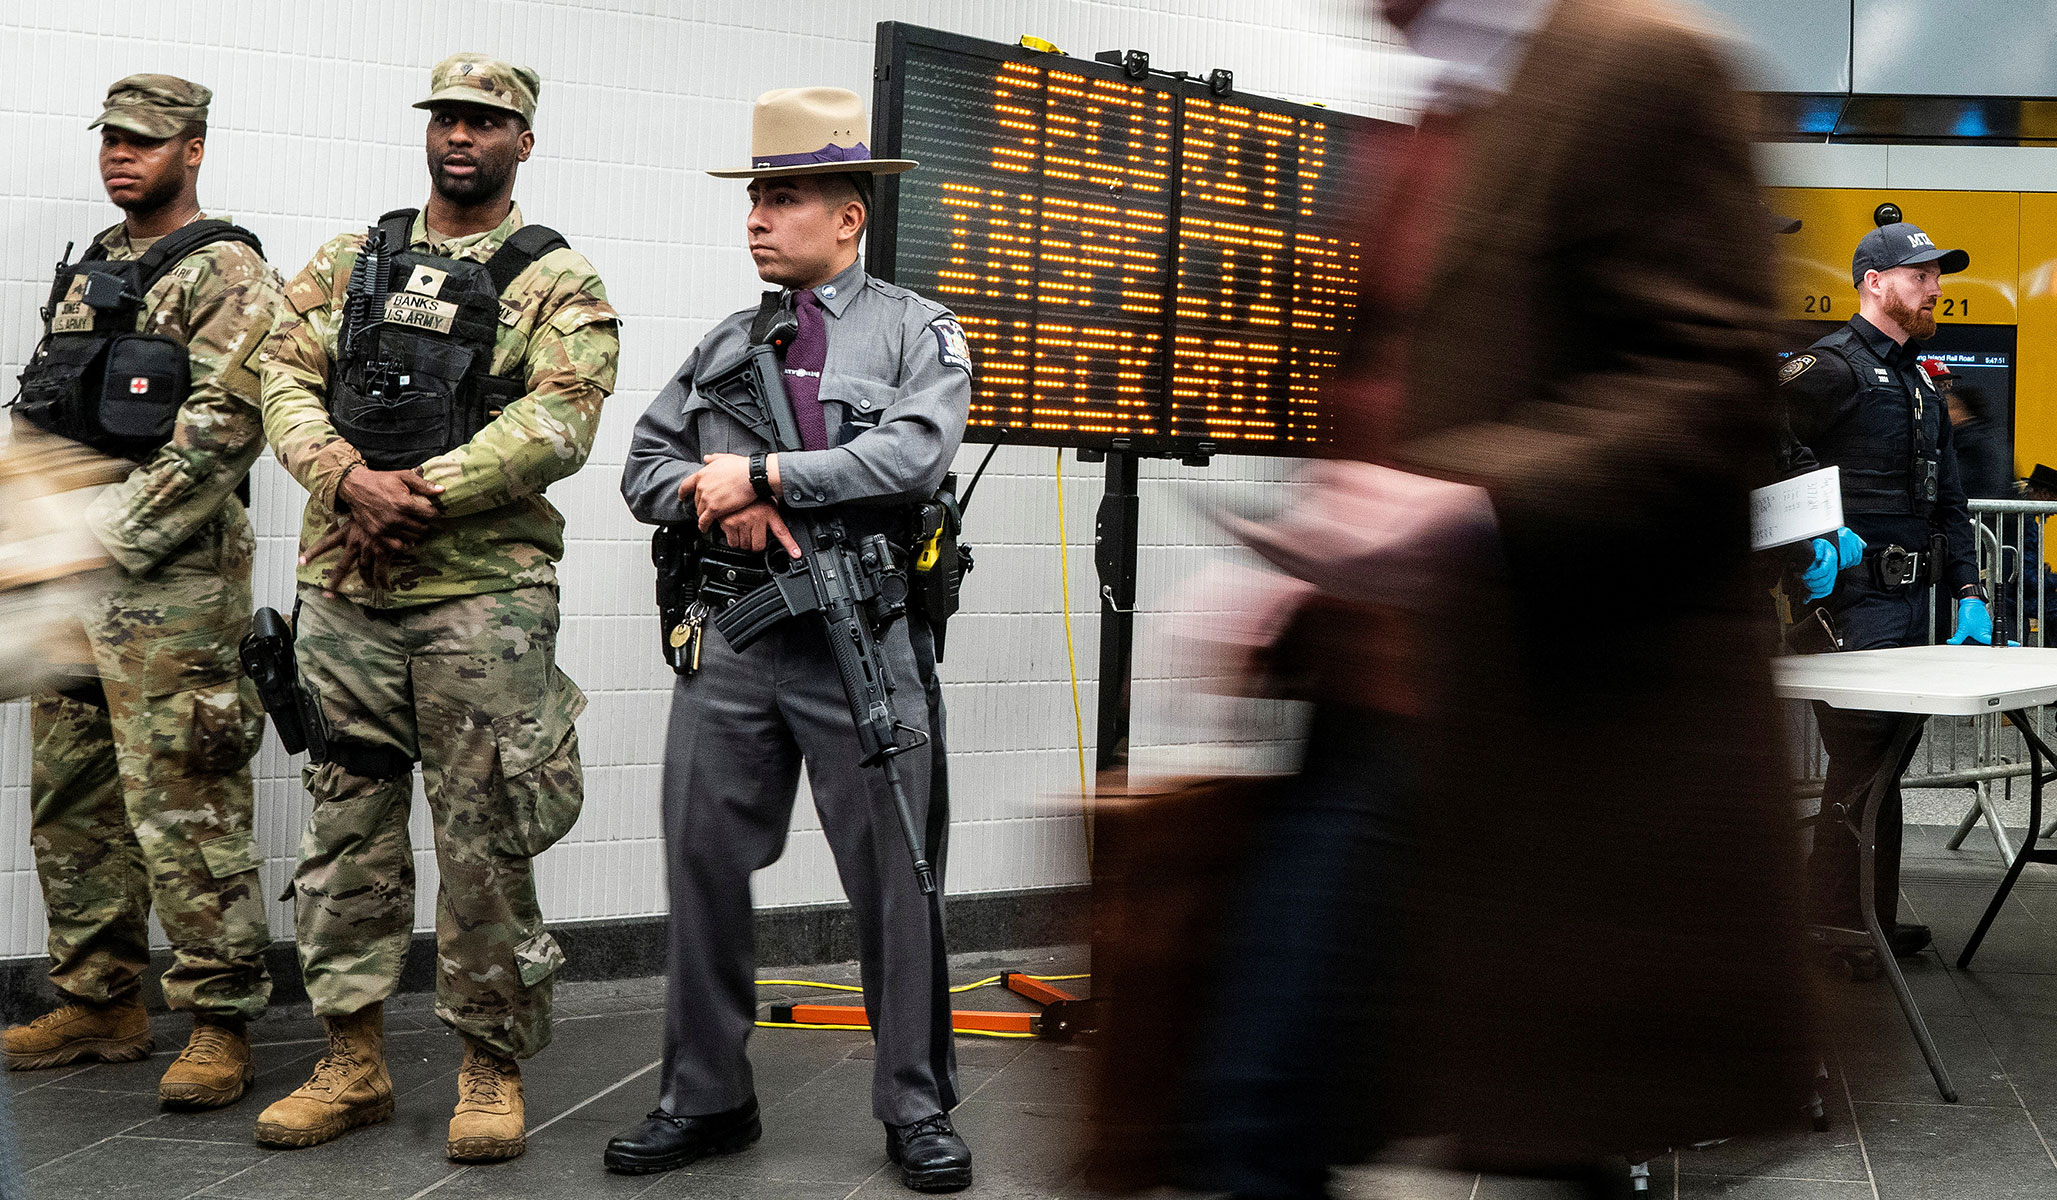 New York City to Install Gun Detectors in Subway Stations as Violent Crime Rises